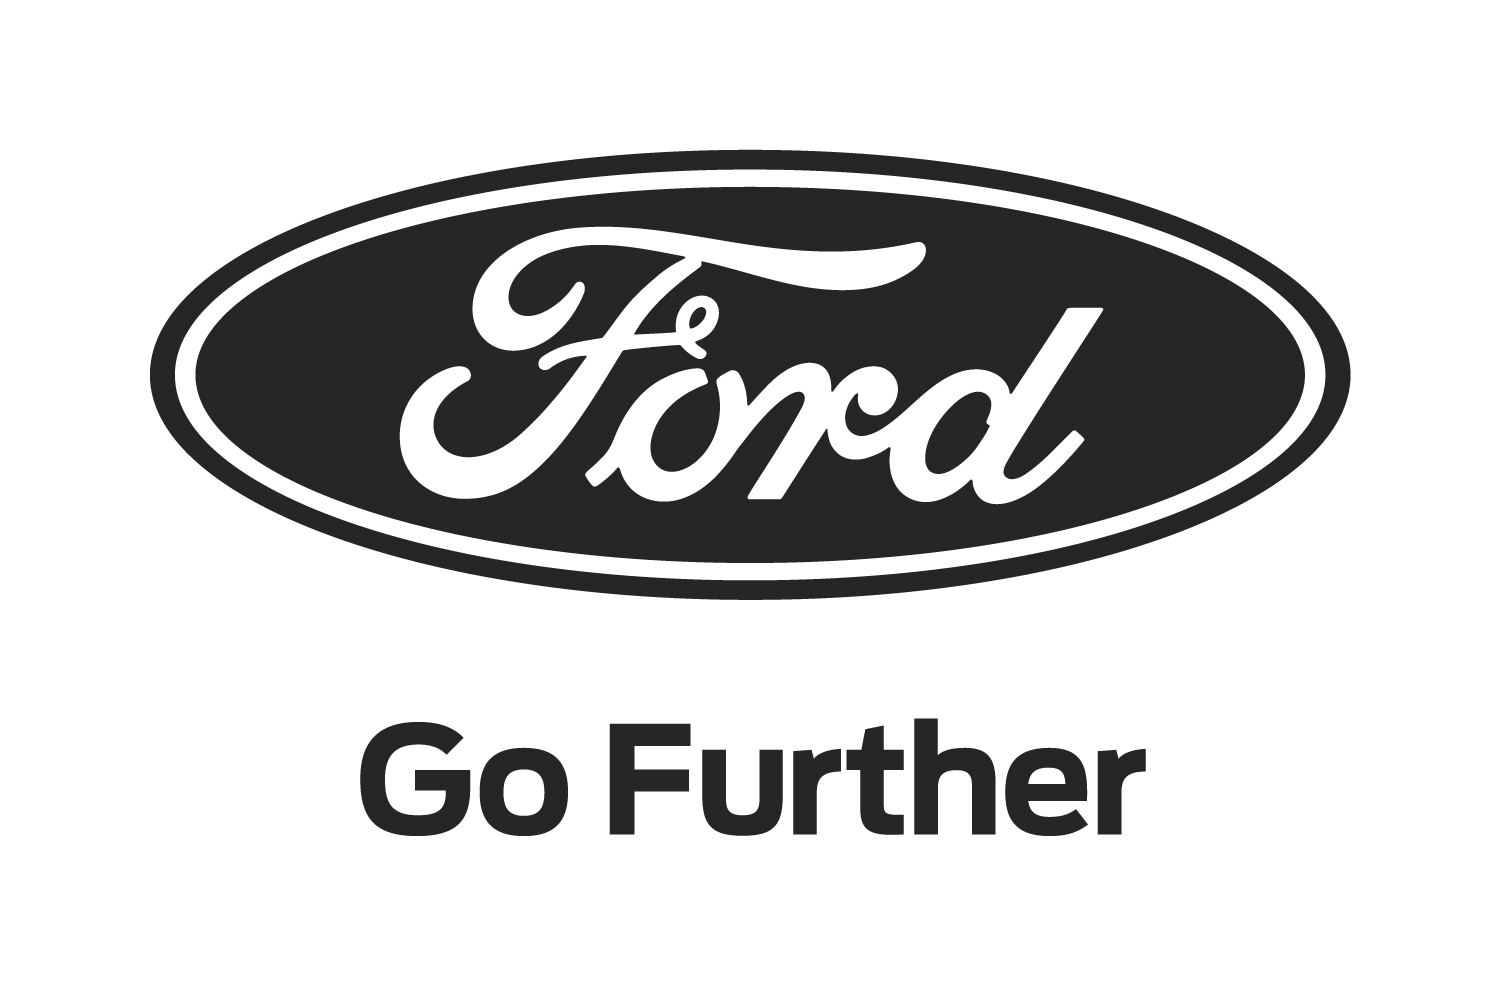 Black and White Ford Logo - John Andrew Ford Andrew. New, Used and Demonstrators Ford